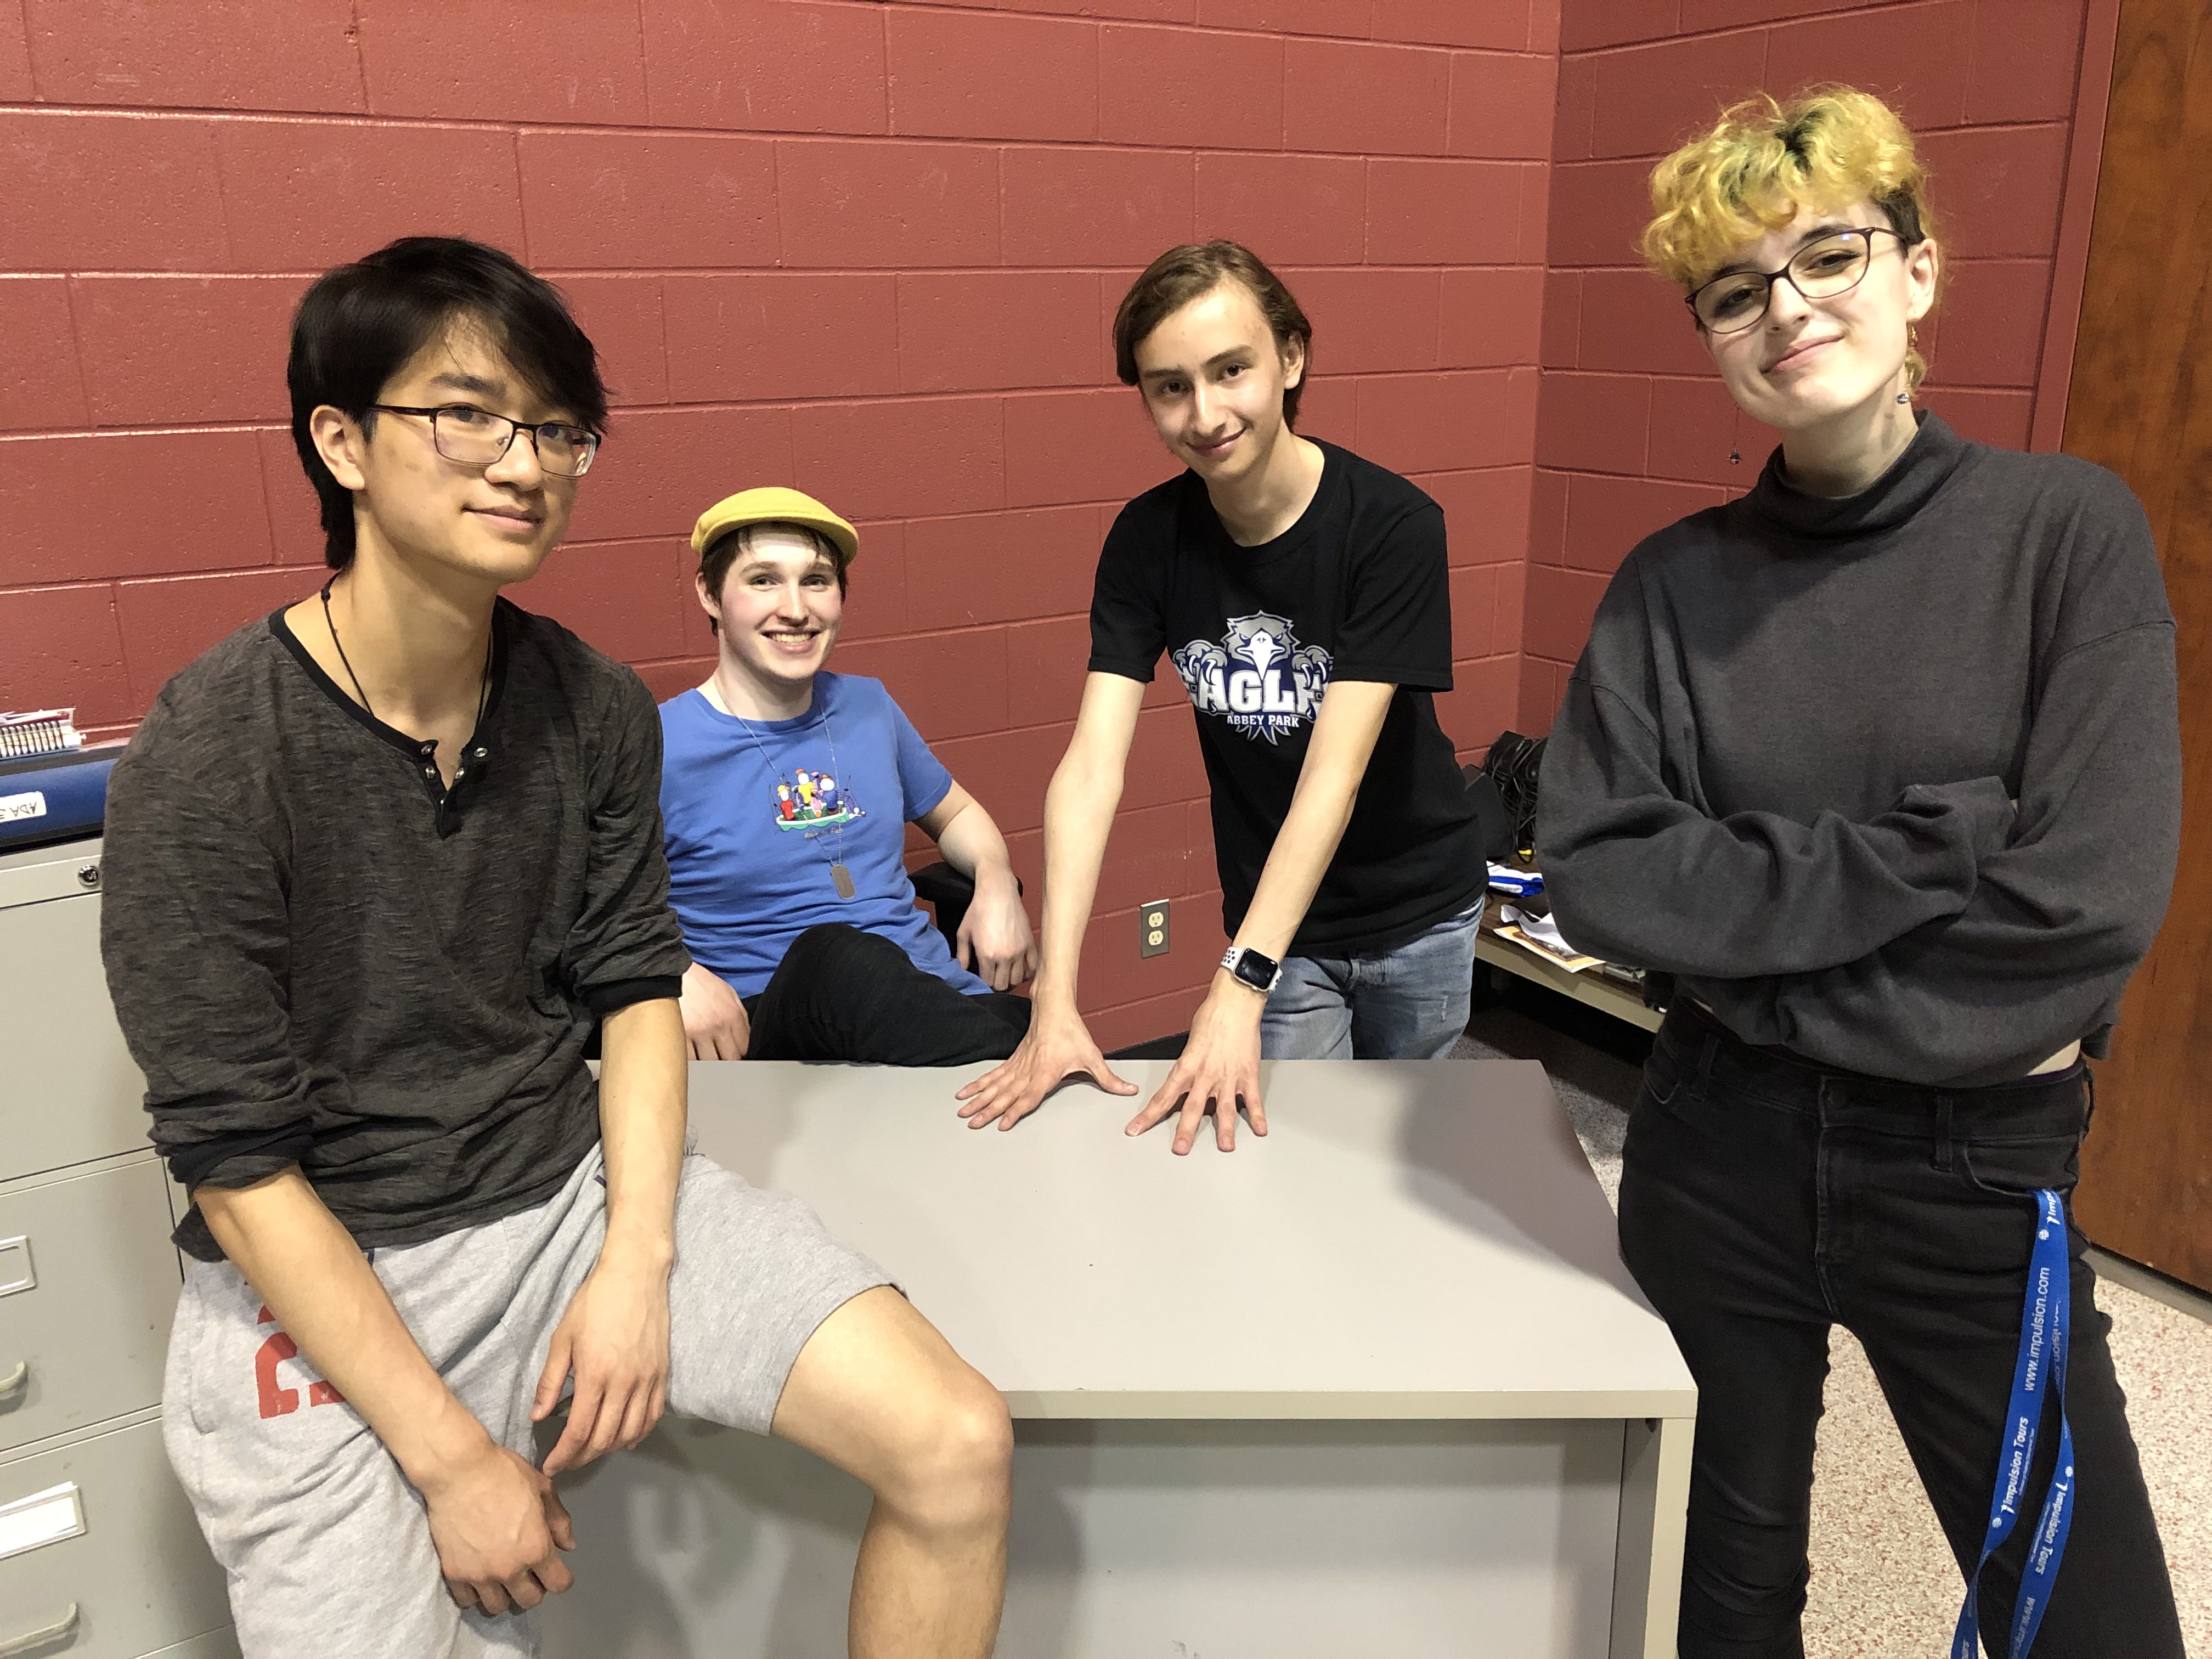 Pictured left to right: Linus Ma, Callum Armstrong, Oliver Beckwith and Jordan Dancyger. (Not pictured: Marko Matov.)